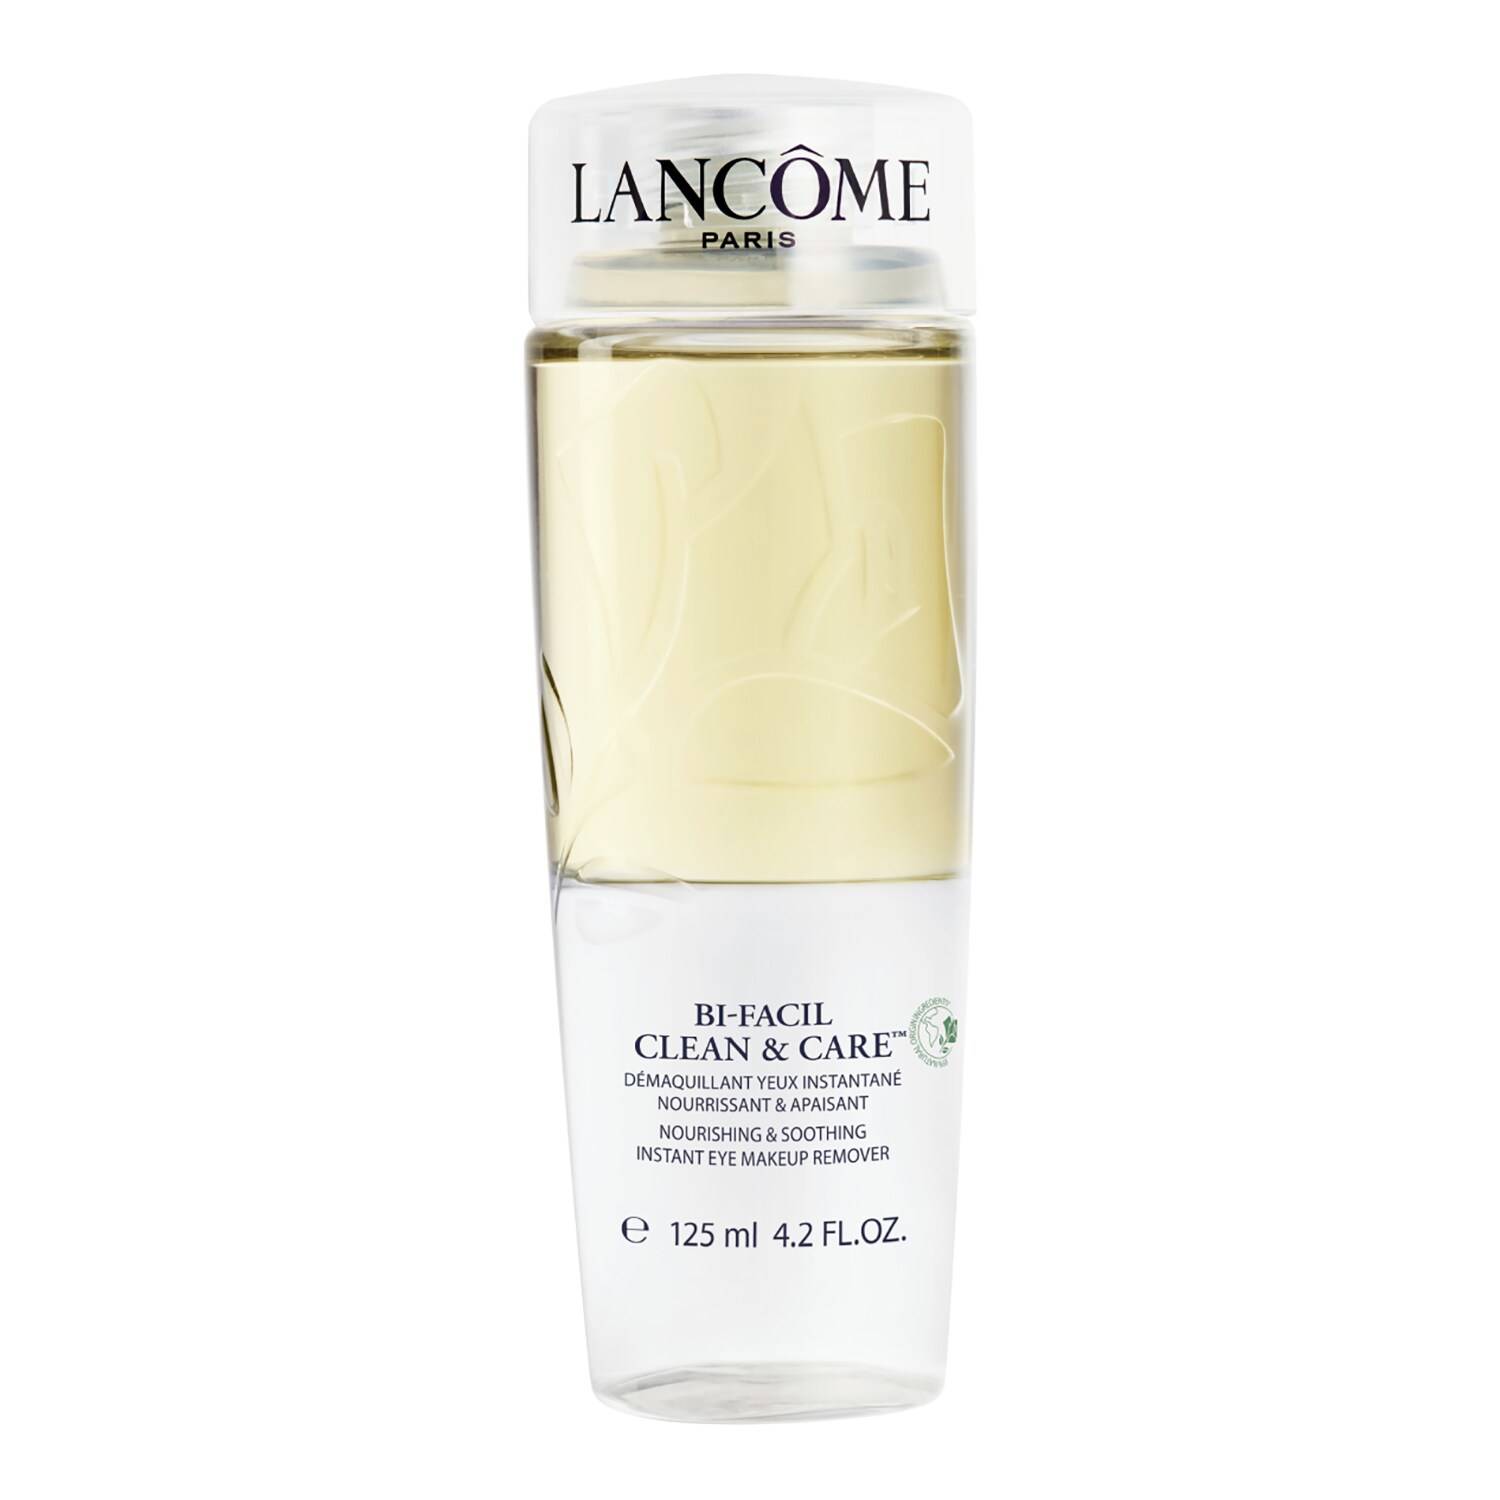 Lancome Bi-Facil Clean & Care - Nourishing & Soothing Instant Eye Makeup Remover 125 Ml